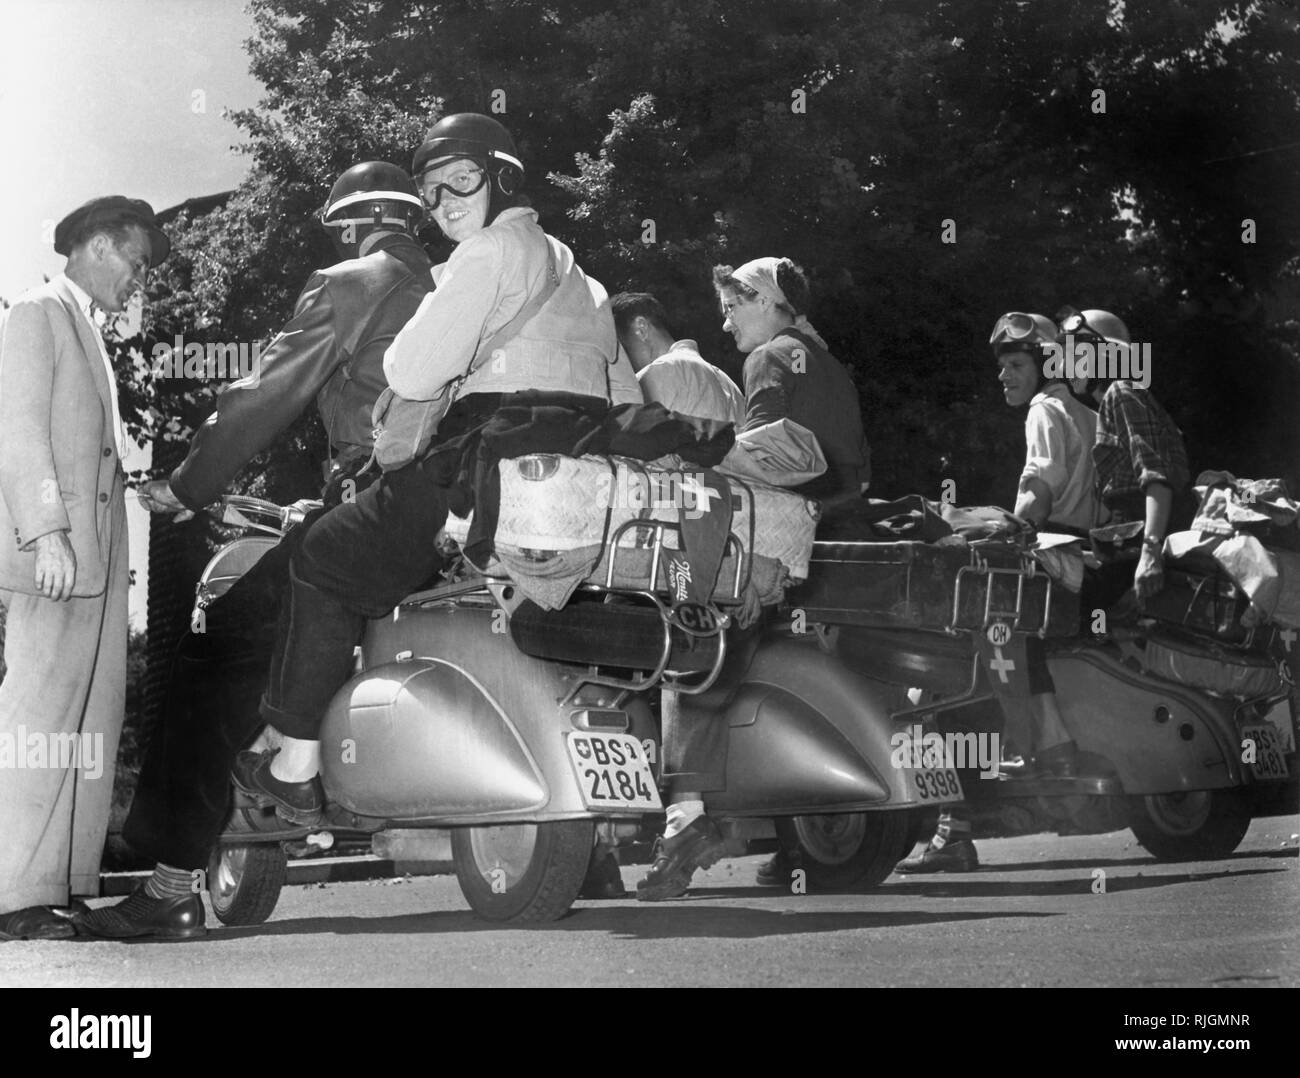 Vespa at scooter rally Black and White Stock Photos & Images - Alamy